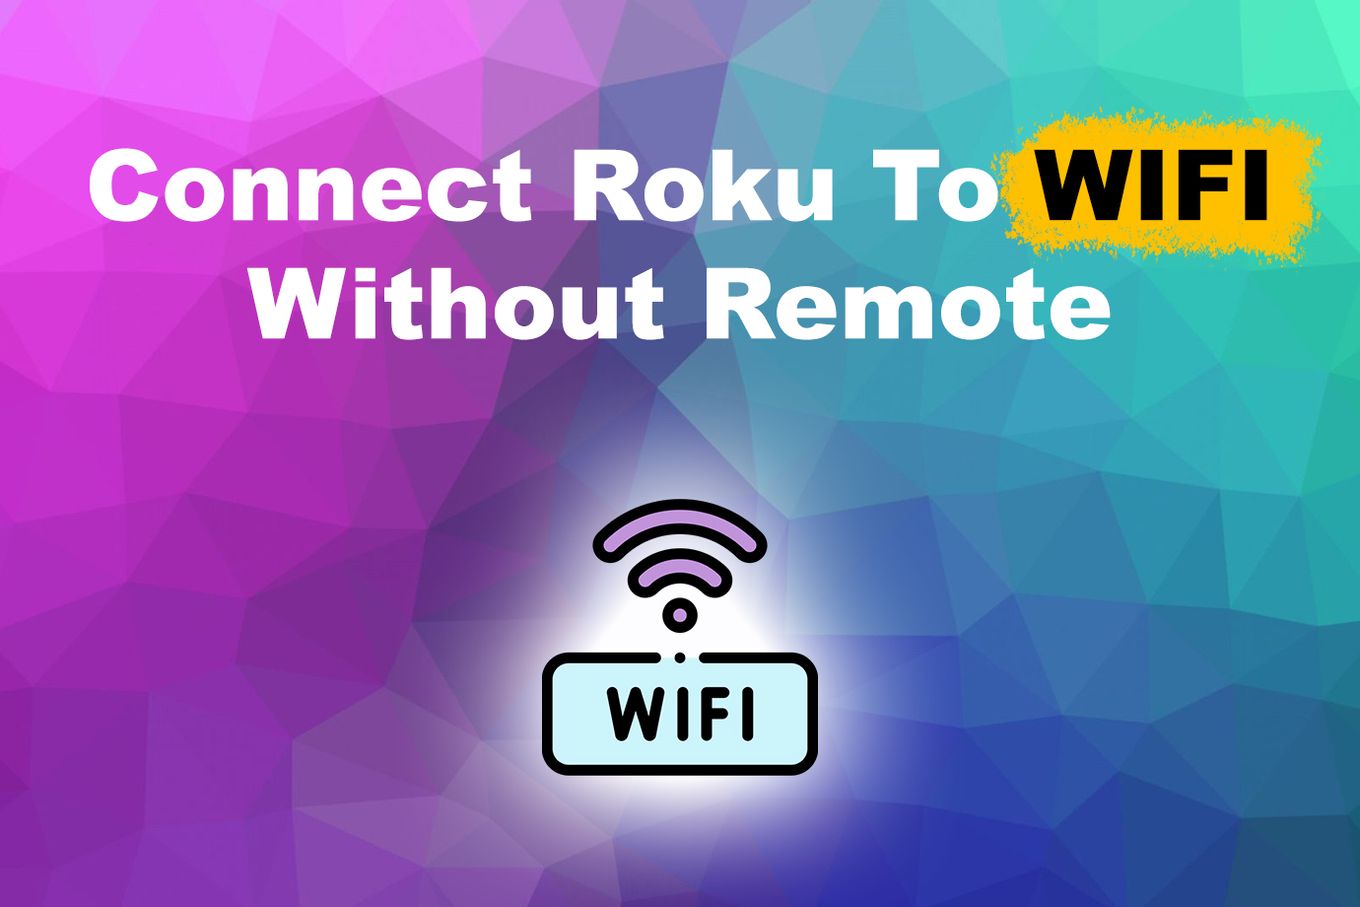 Connect Roku To WIFI Without Remote